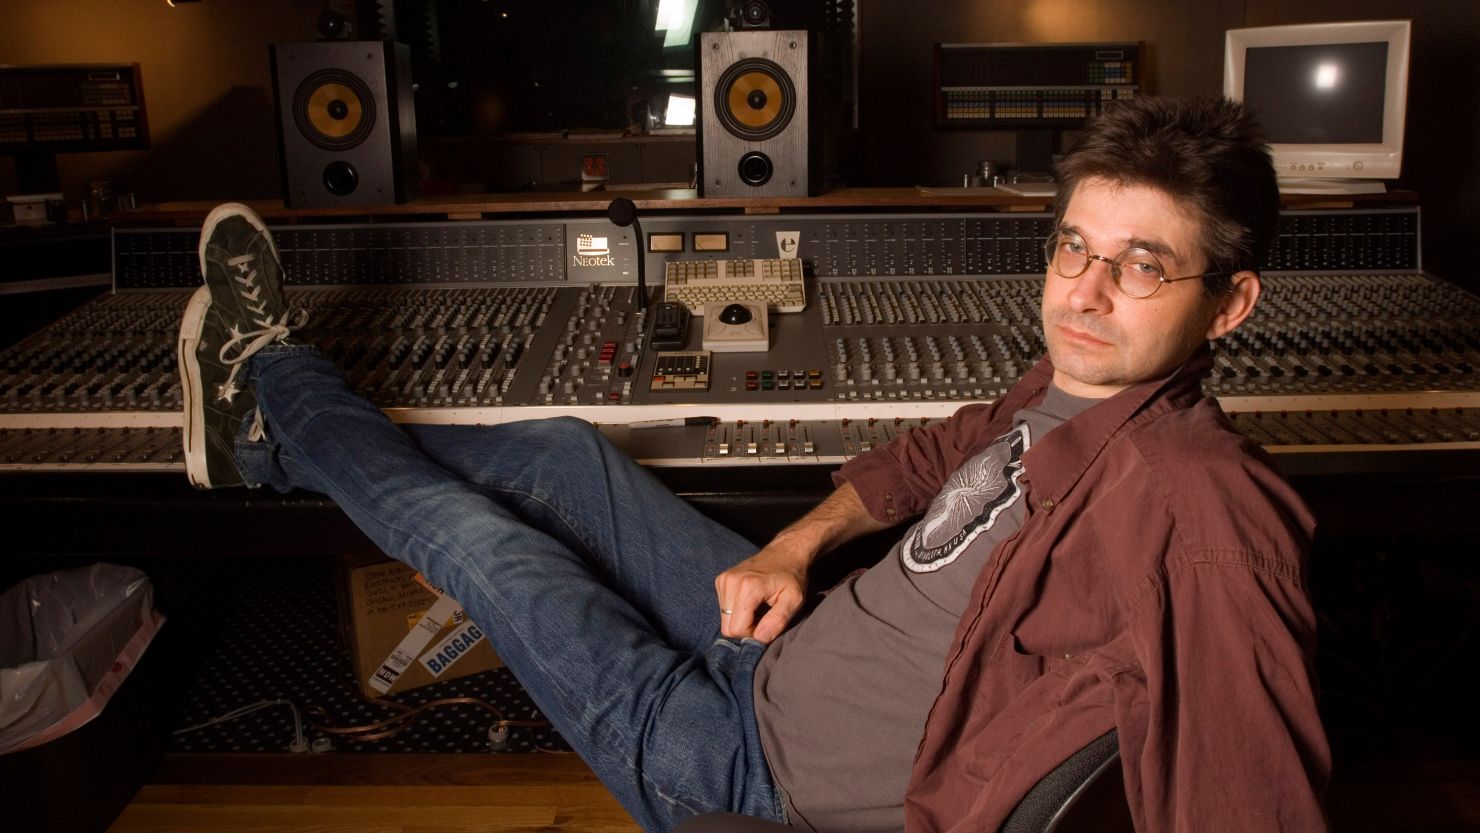 American musician and producer Steve Albini poses at Electrical Audio in Chicago on June 24, 2005.